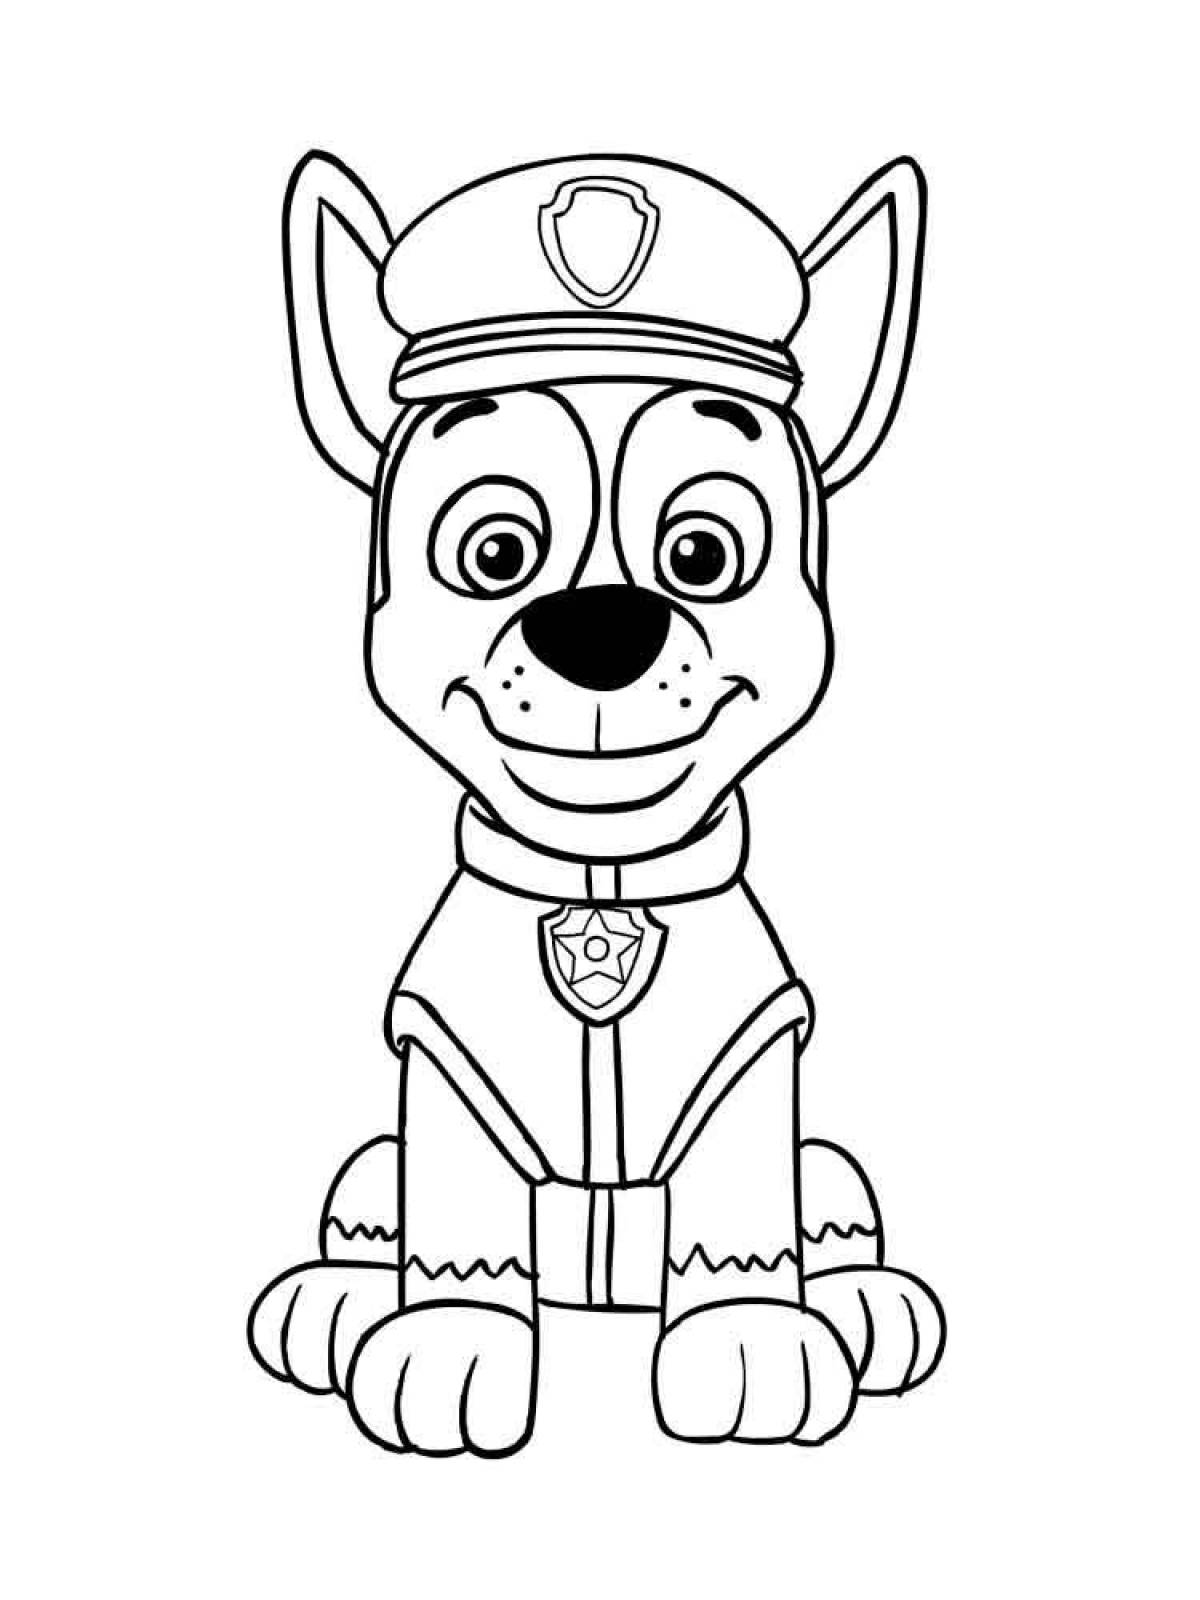 Colorful coloring page paw patrol racer